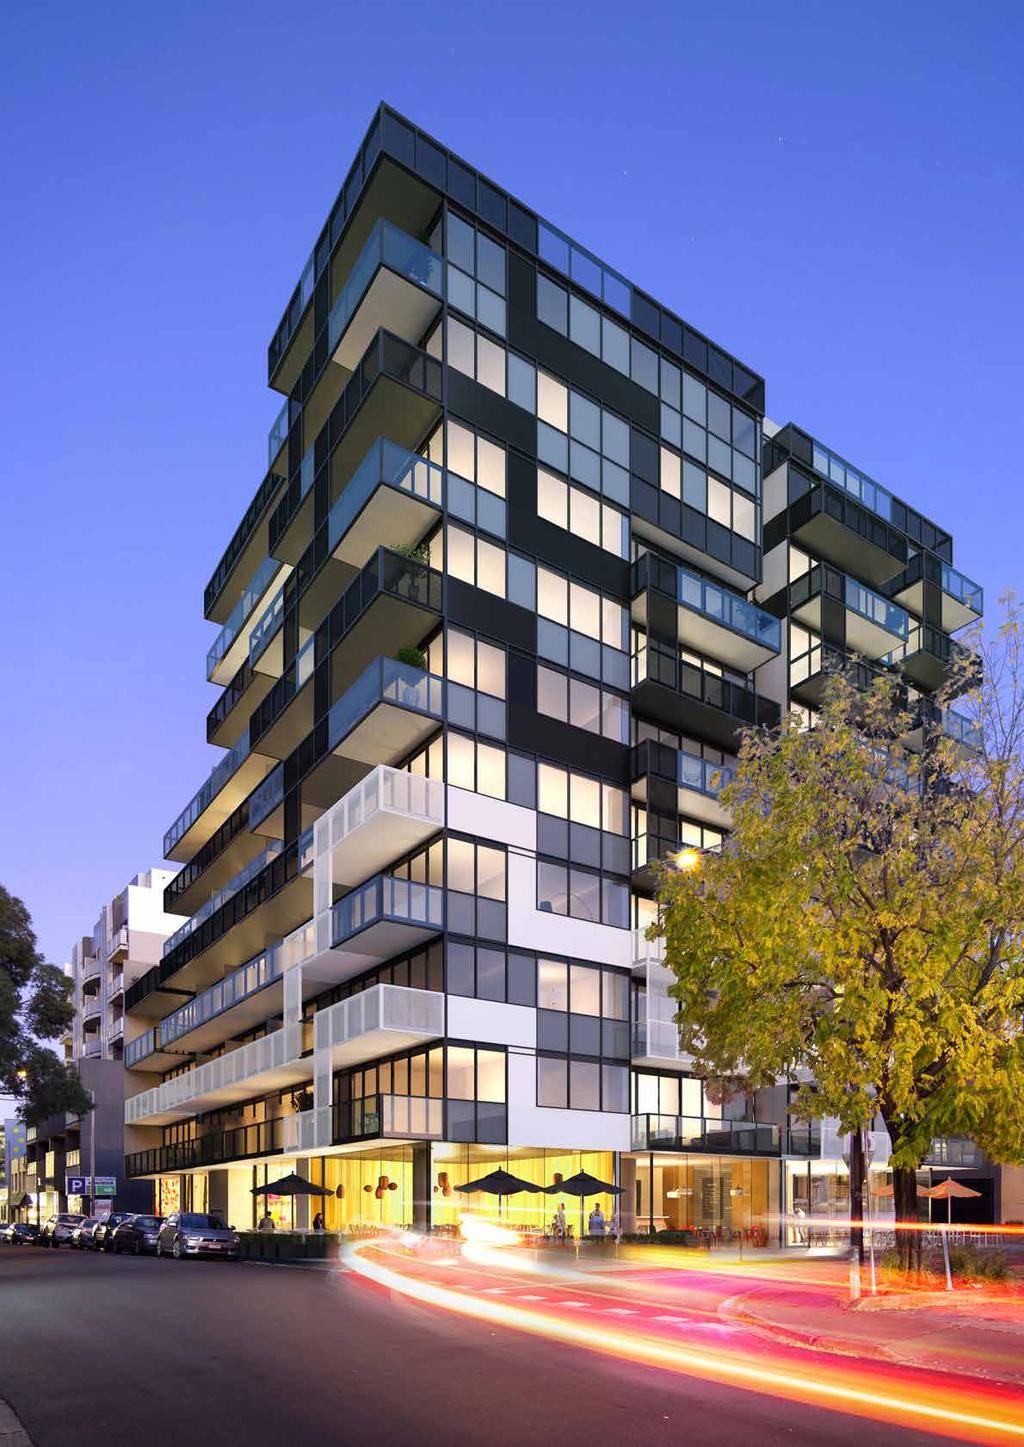 THE BUILDING Contemporary architecture in the heart of South Yarra DISCOVER LUXURY 1, 2 & 3 BEDROOM CONTEMPORARY APARTMENTS IN A SIMPLY OUTSTANDING LOCATION WITH SPECTACULAR CITY VIEWS.